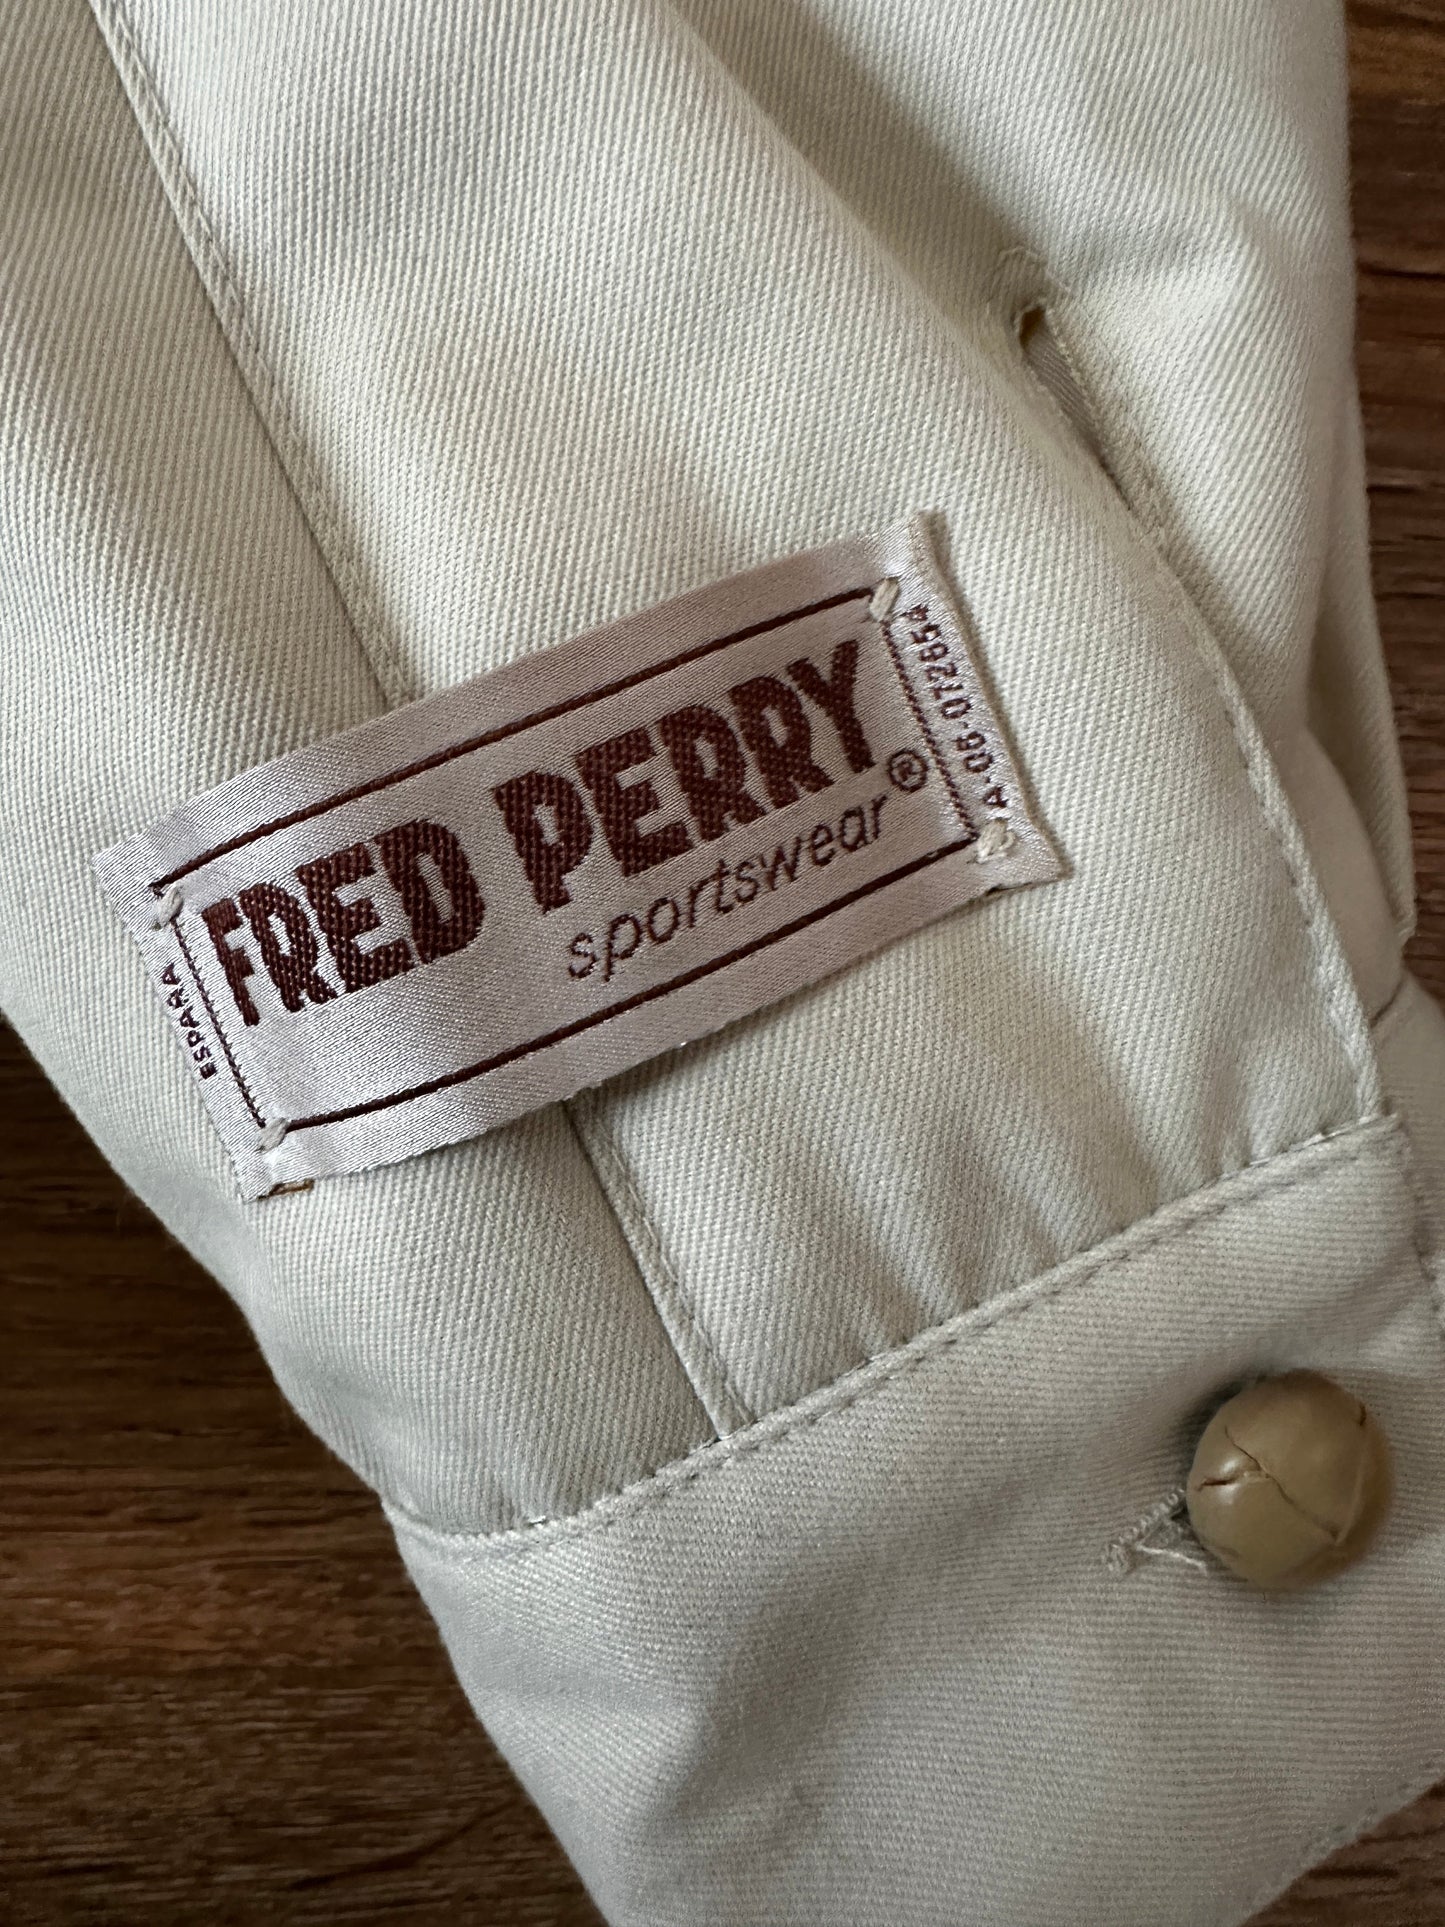 Fred Perry Vintage 80s Anorak Light-beige - Deadstock - 58 / XXL - Made in Spain